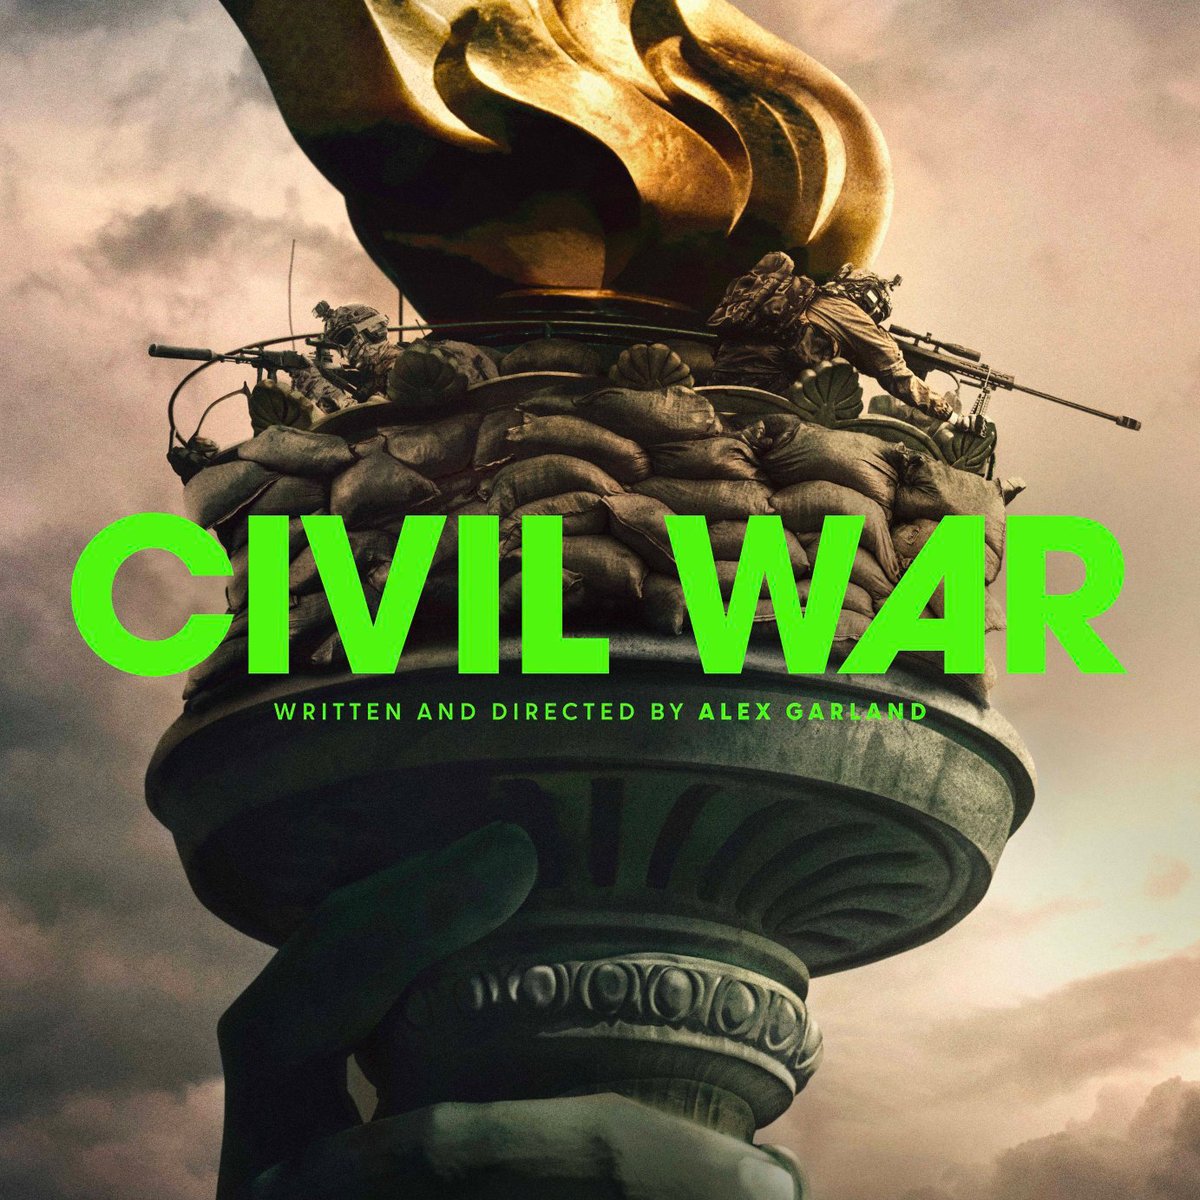 Glad to share the mobile microsite we did with @watsondg for the @A24 movie Civil War by Alex Garland. → civilwar.movie